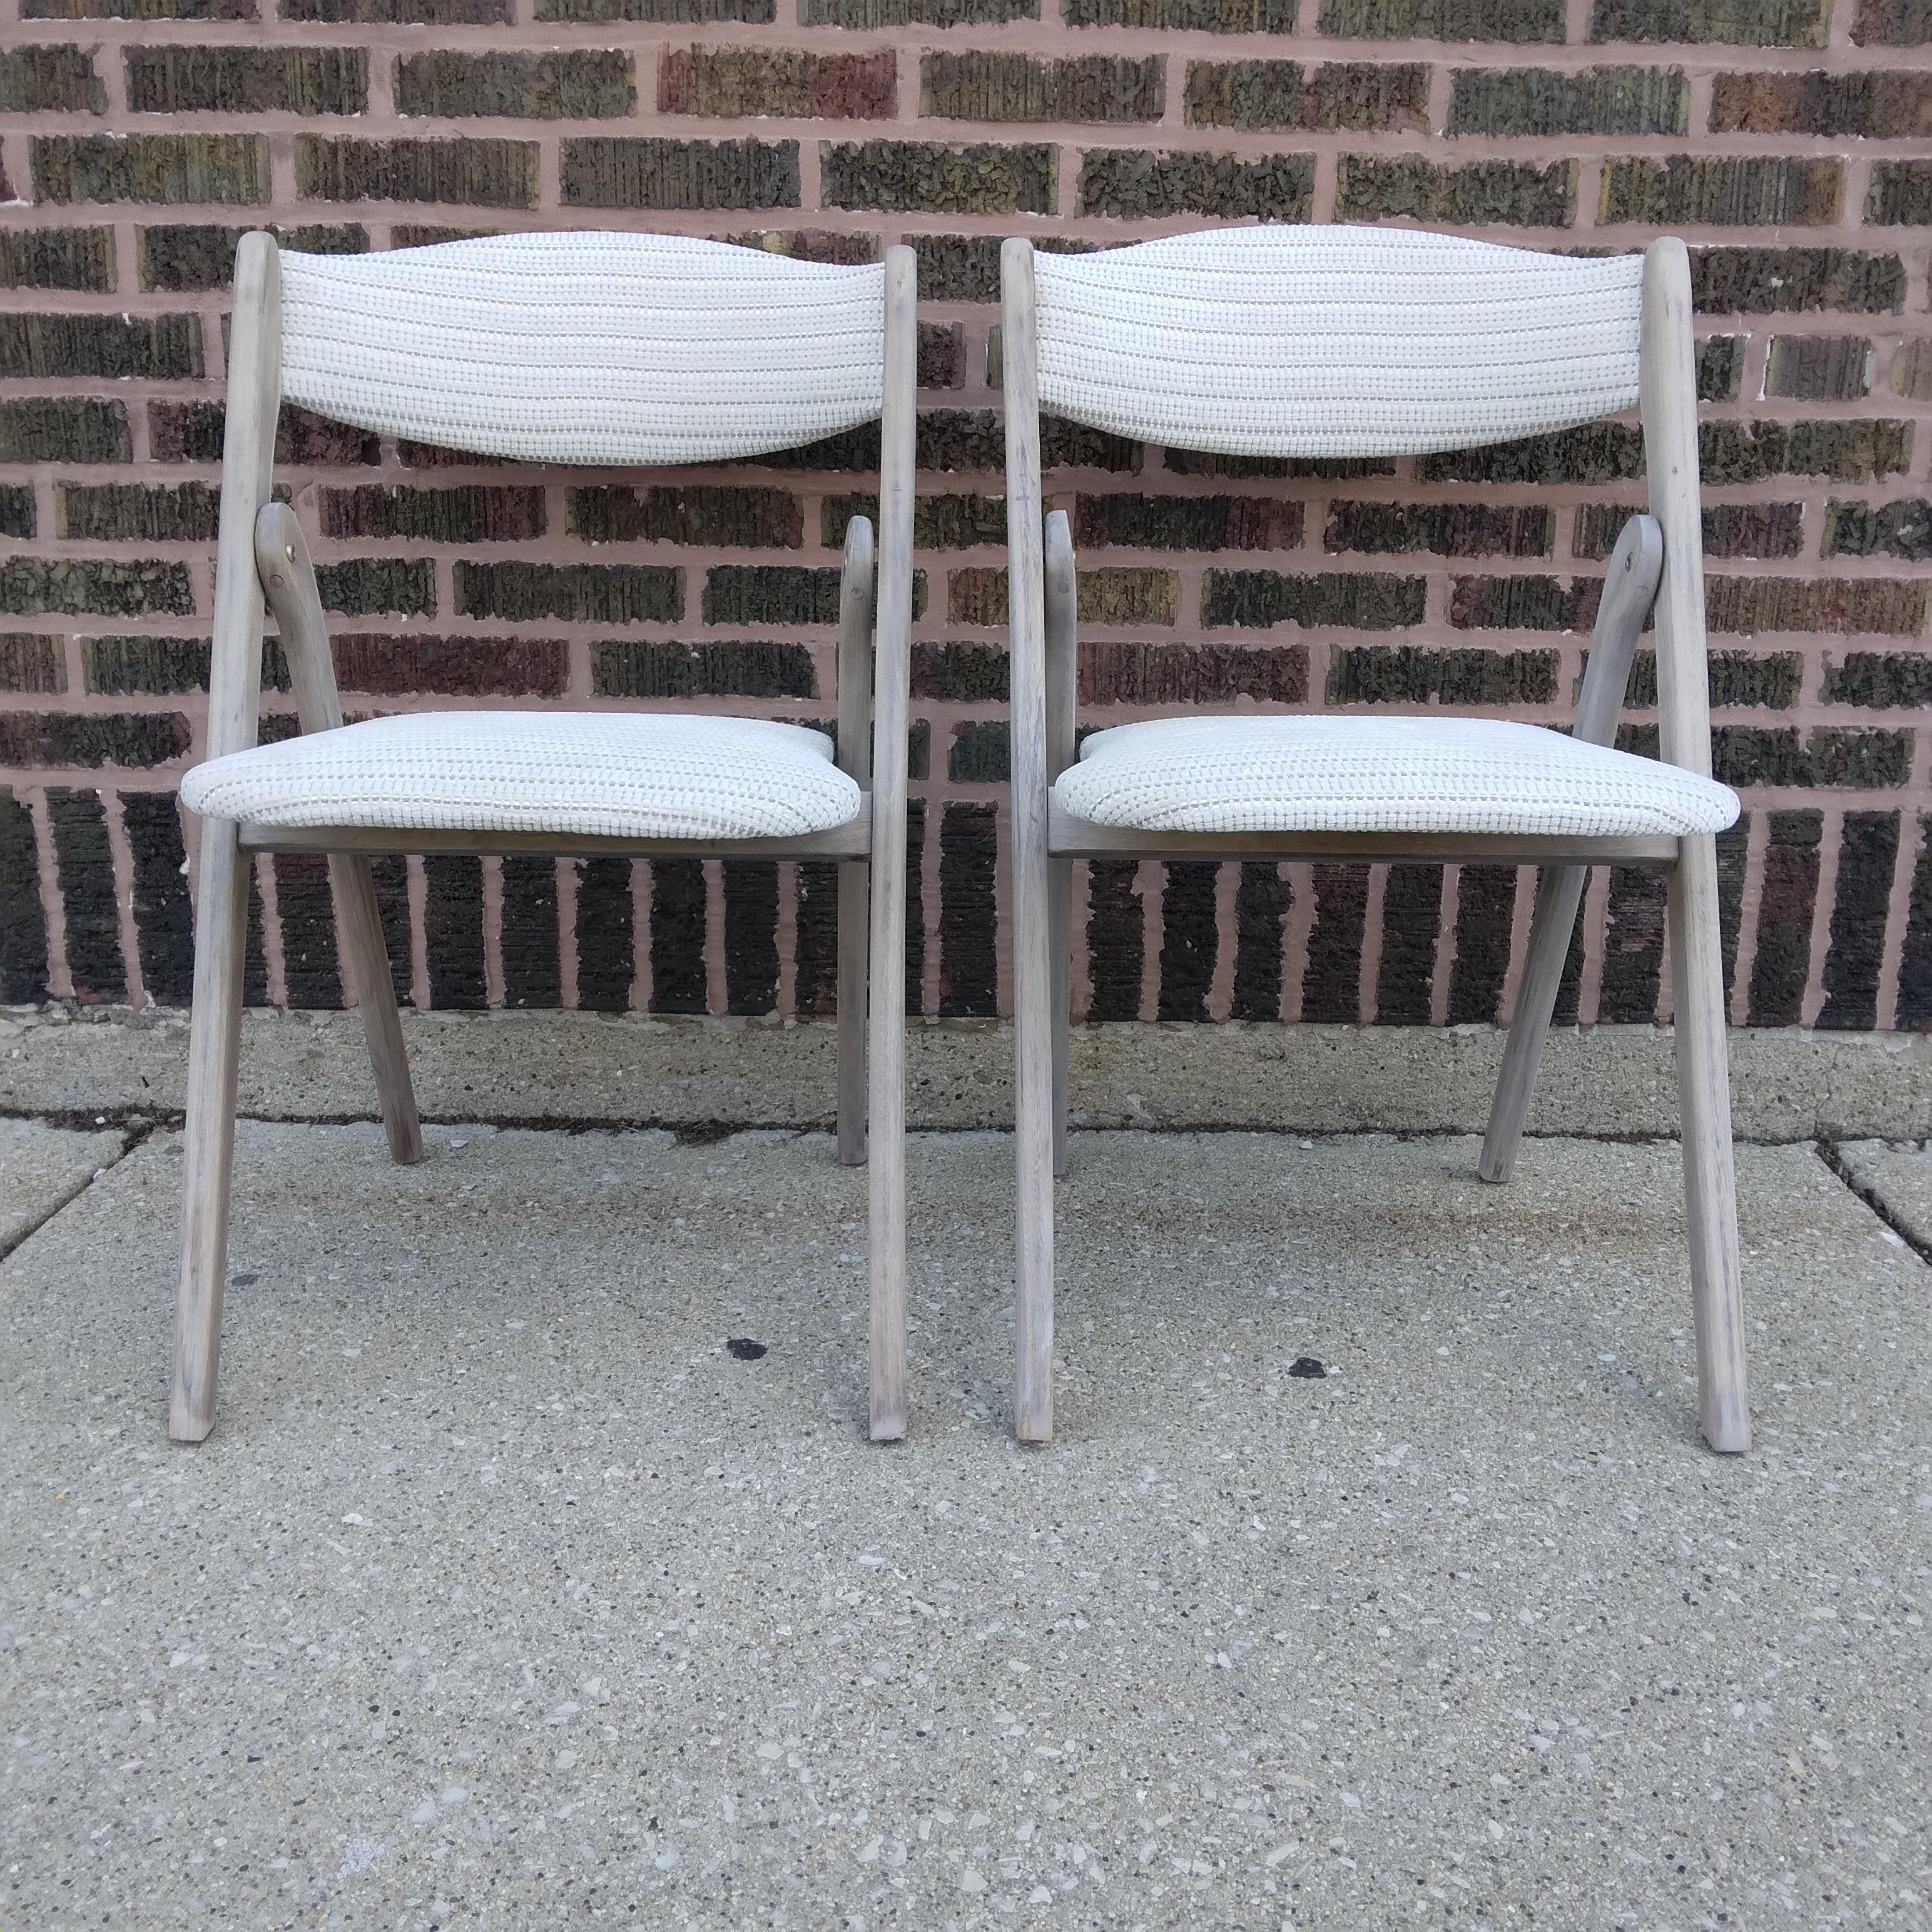 Awash with light, these freshly refinished vintage chairs are just stunning. Originally known as Coronet Wonderfold chairs, these lovelies are going on sixty years old and are as sturdy as ever. We love their whitewashed, organic frames and chunky,